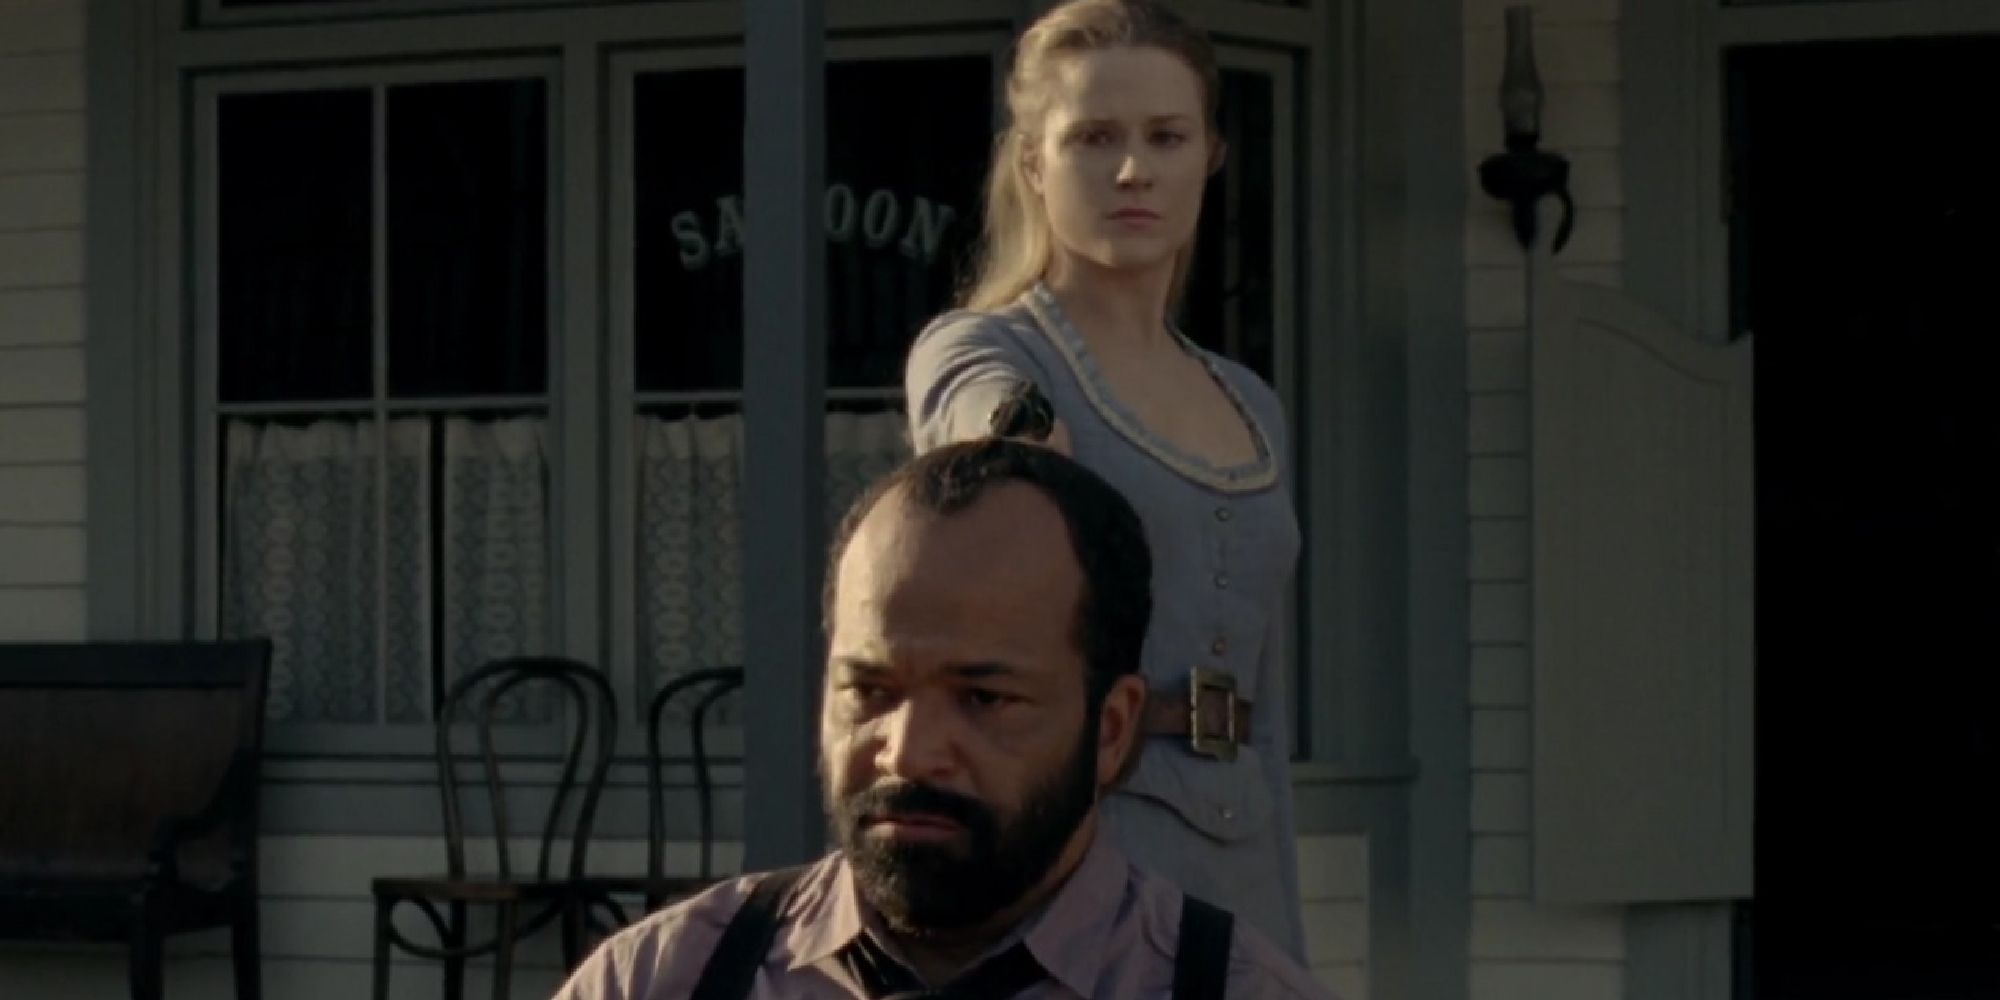 Dolores aiming a gun at Arnold's head in season 1 of Westworld